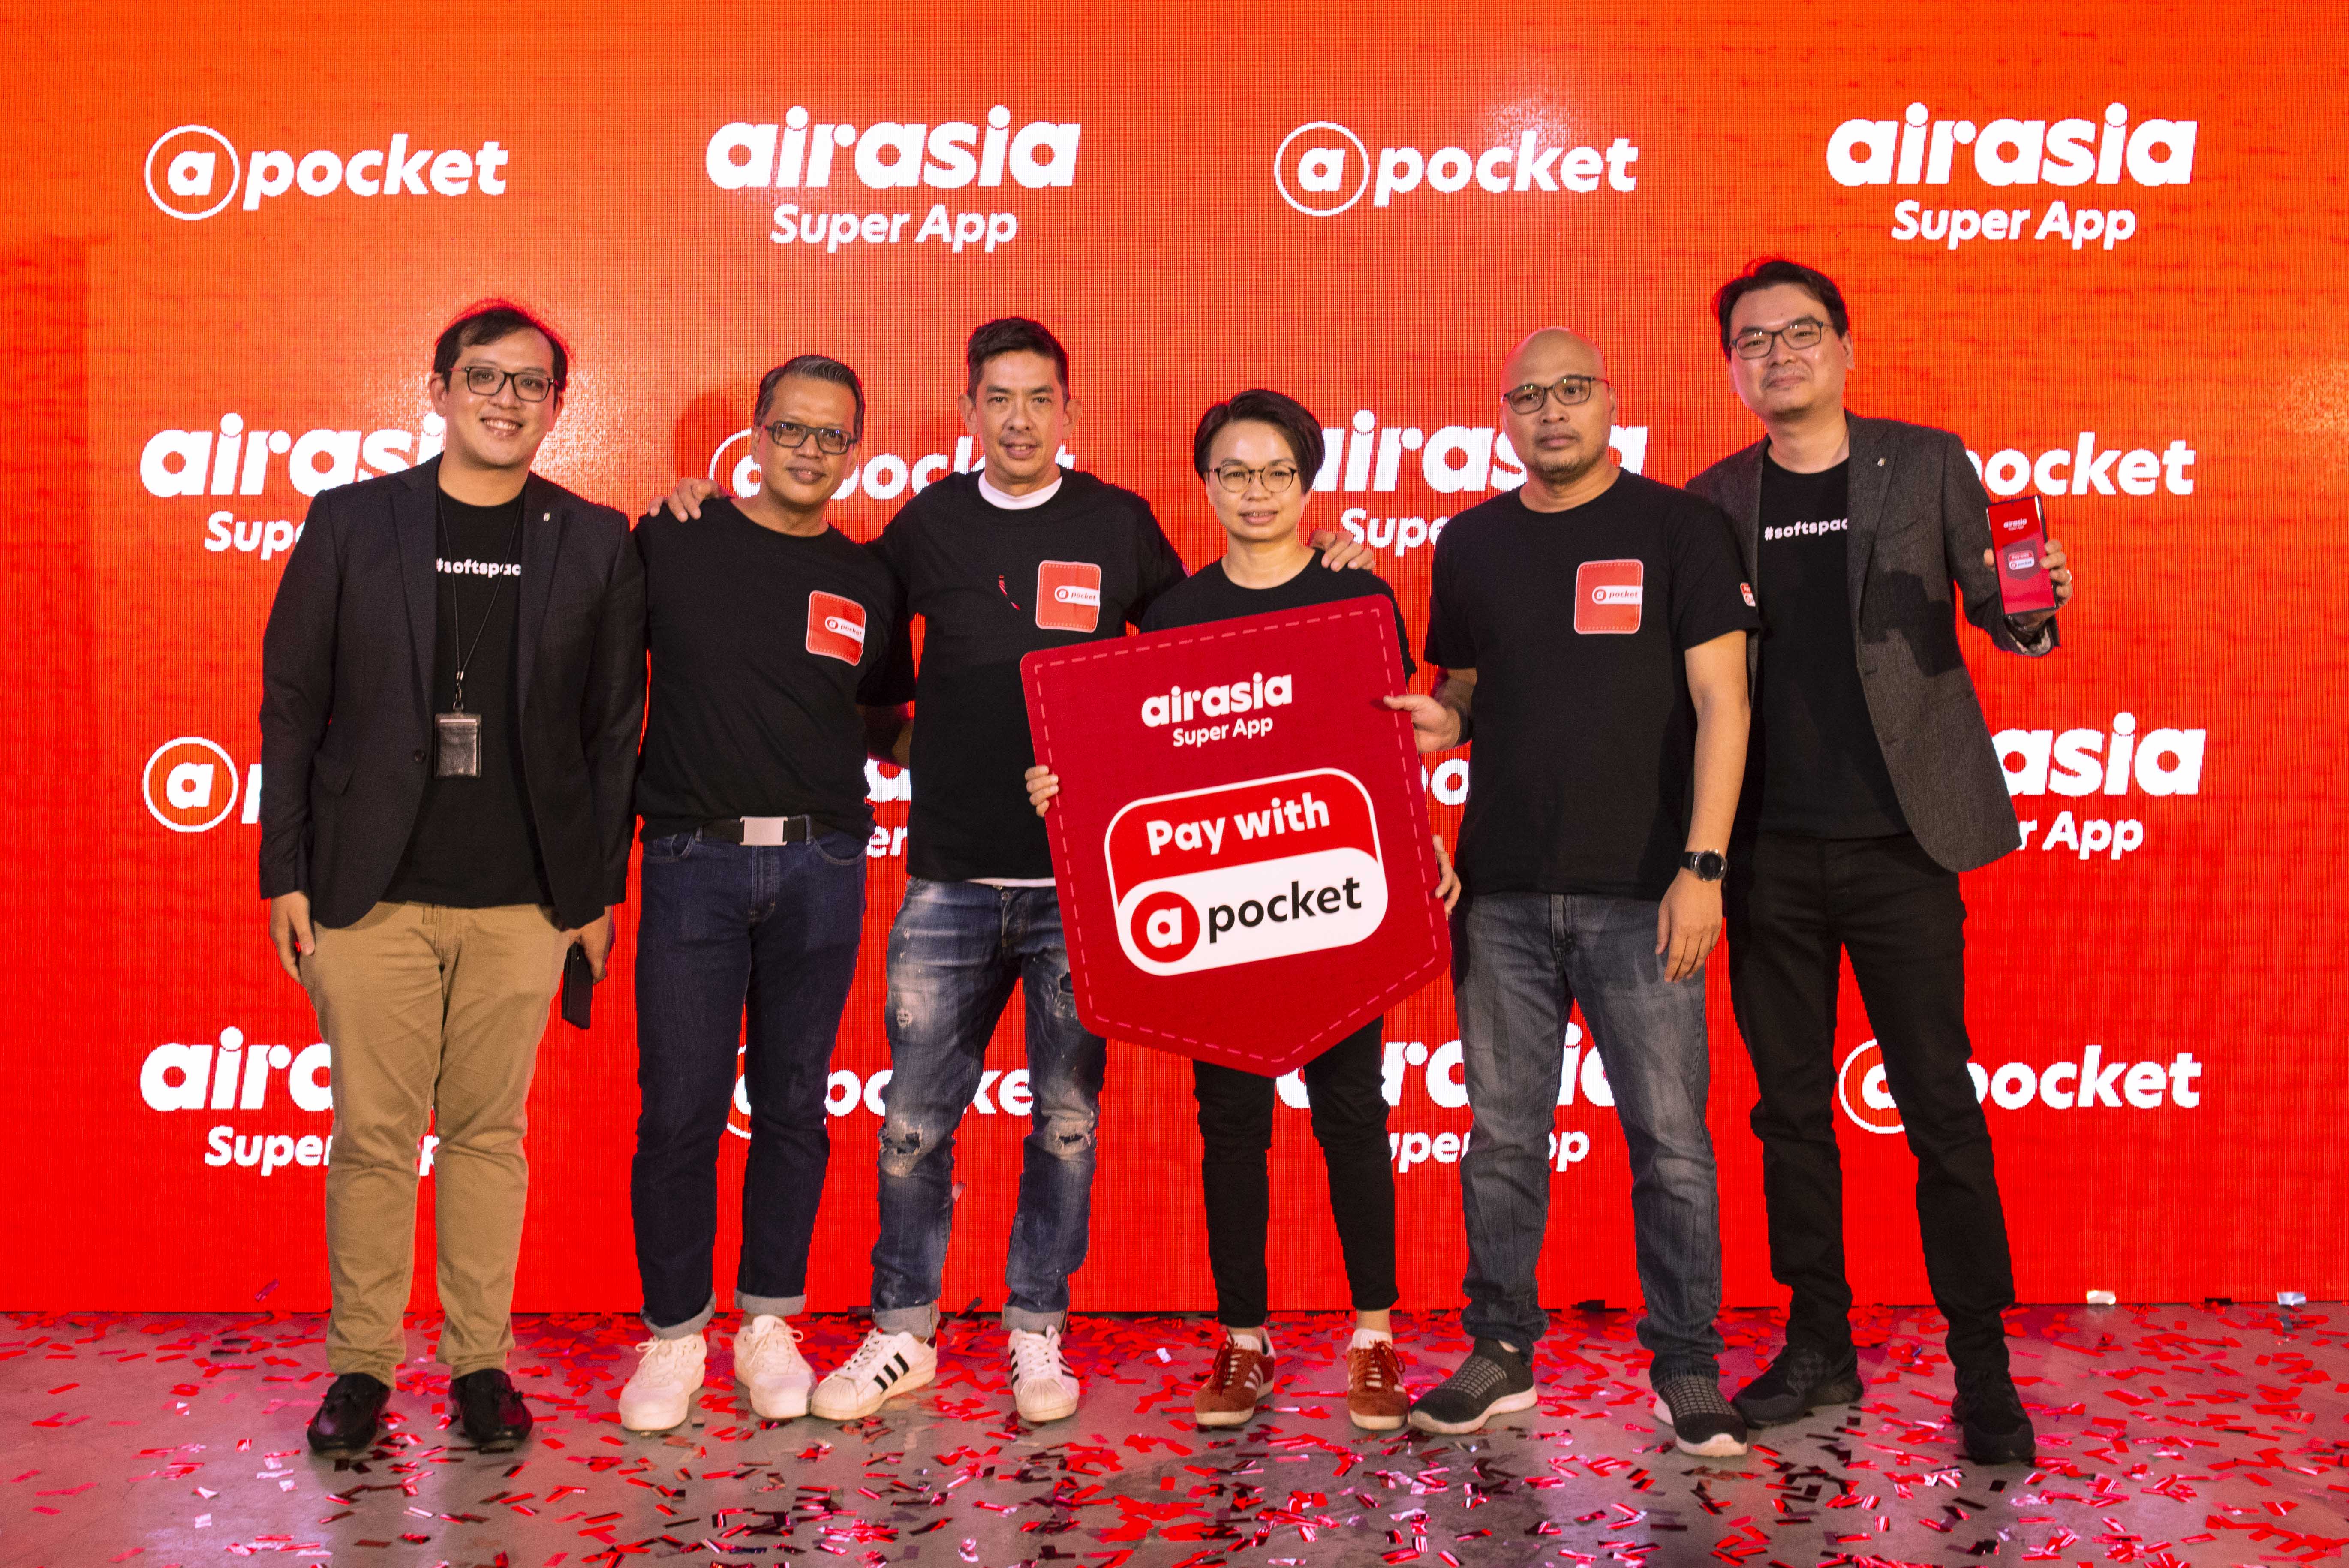 (From left) Chris Leong, CEO of Fass Payment Solutions, Mohamad Hafidz Mohd Fadzil, airasia Super App's chief fintech officer, Colin Currie, president (Commercial), Capital A, Amanda Woo, CEO of airasia Super App, Mohammad Razak Bin Abd Hamid, head of enterprise eayments, airasia Super App, and Joel Tay, CEO of Soft Space at the launch event of airasia pocket